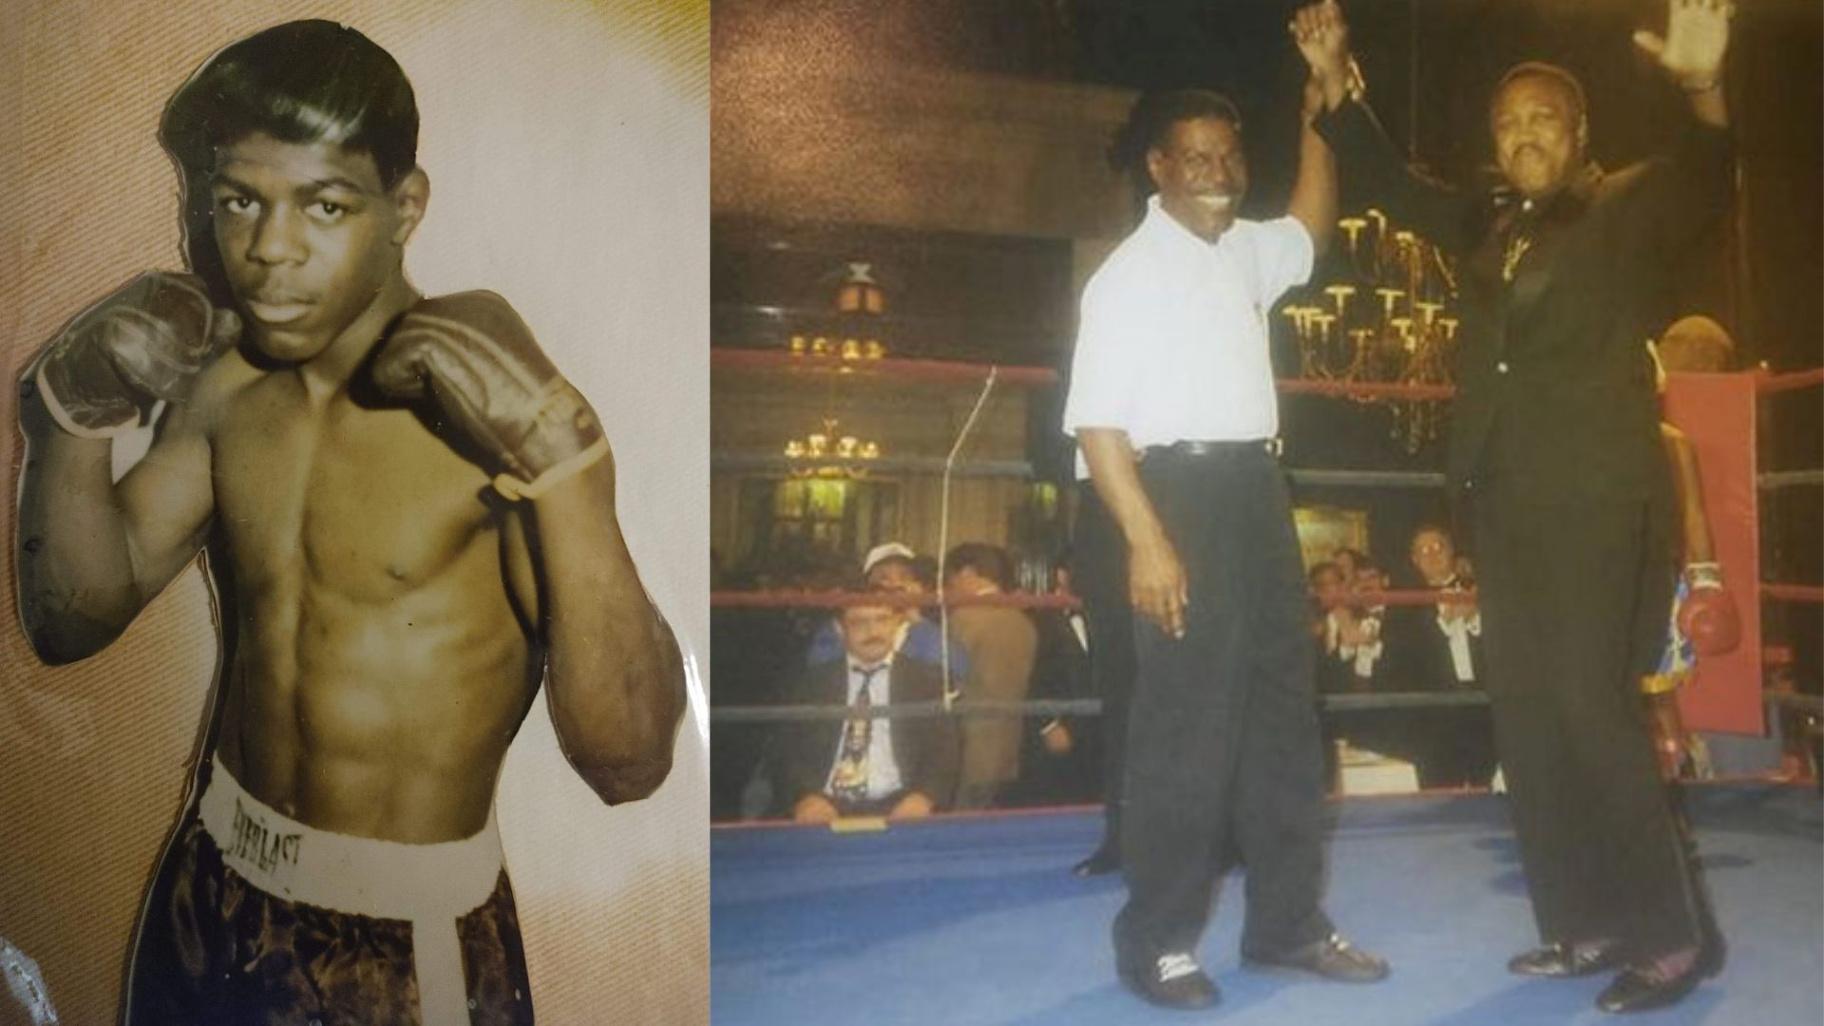 In 1973, Tim Adams won the Triple Crown. Adams stayed in the fight, building a decades-long career as a boxing referee. (Provided by Tim Adams)